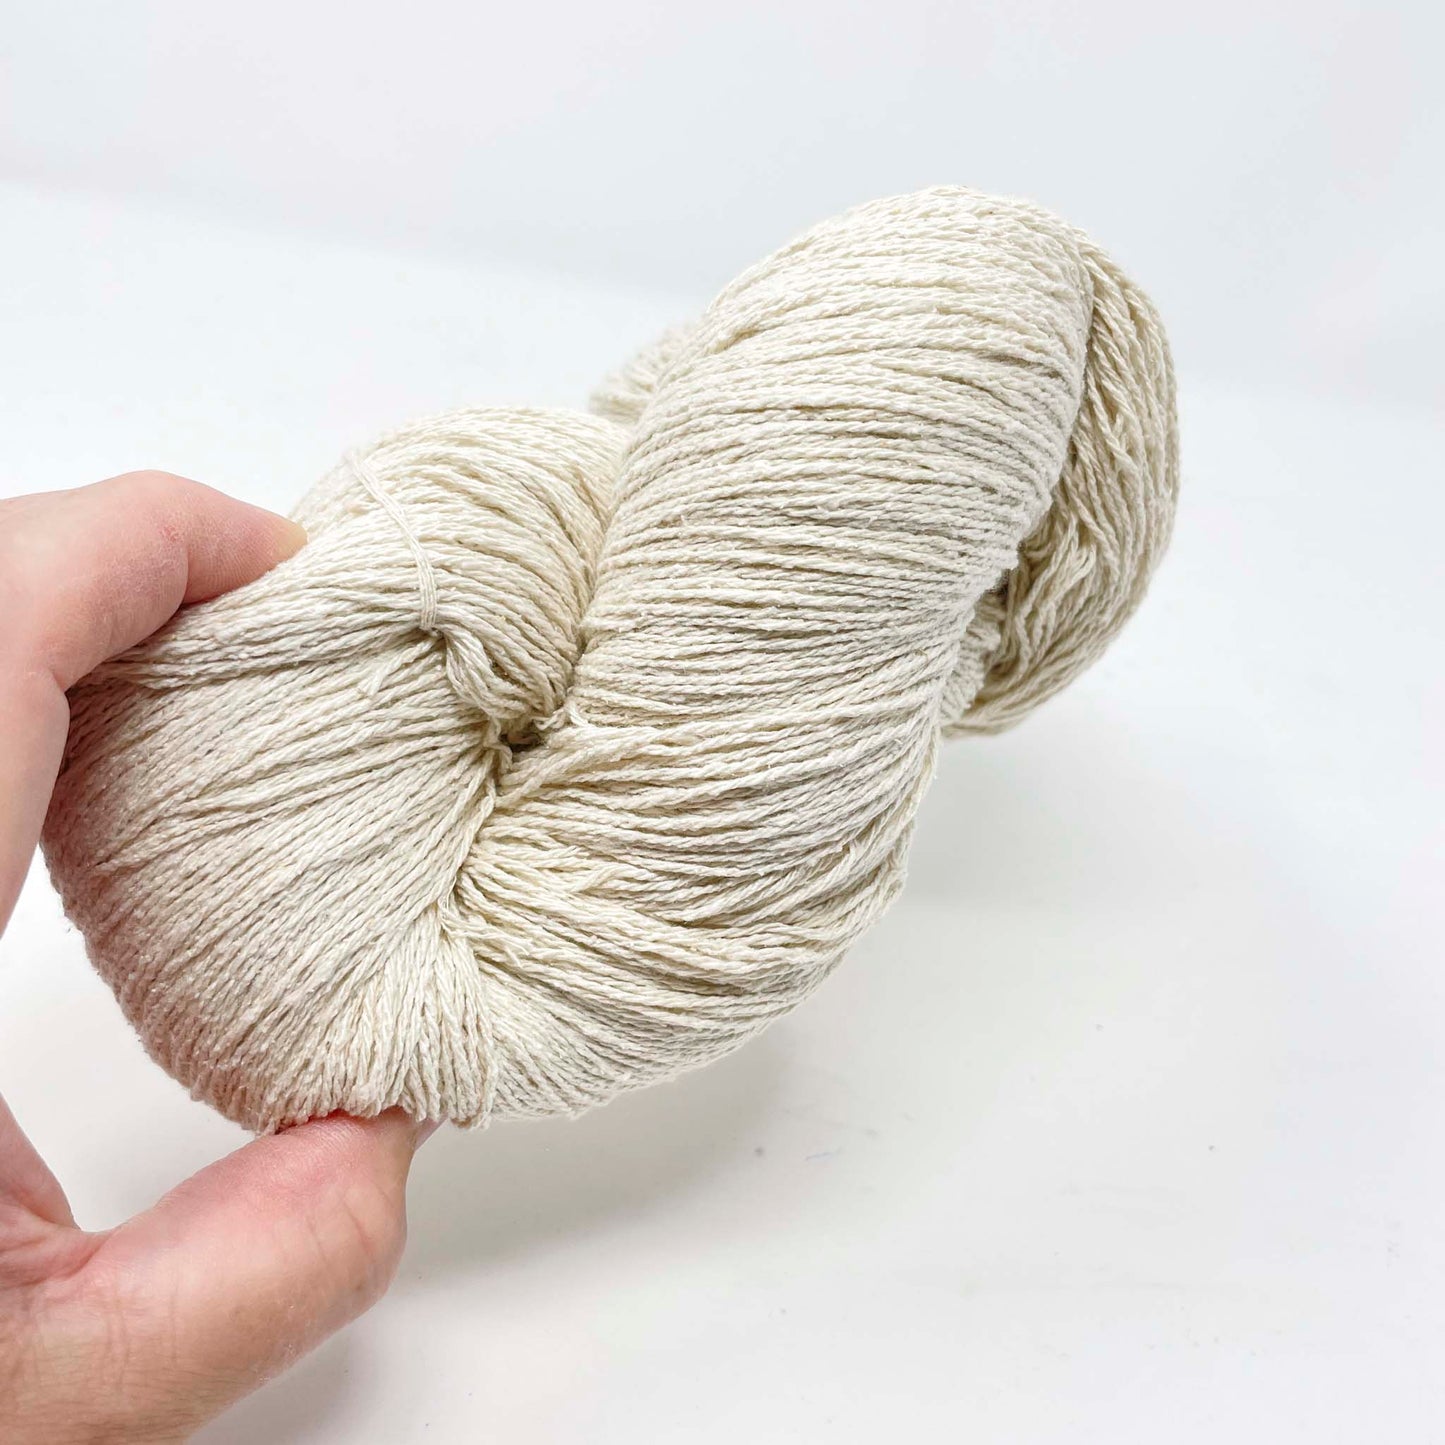 Specialty Rough Weave Yarn - Natural (7.8 oz)